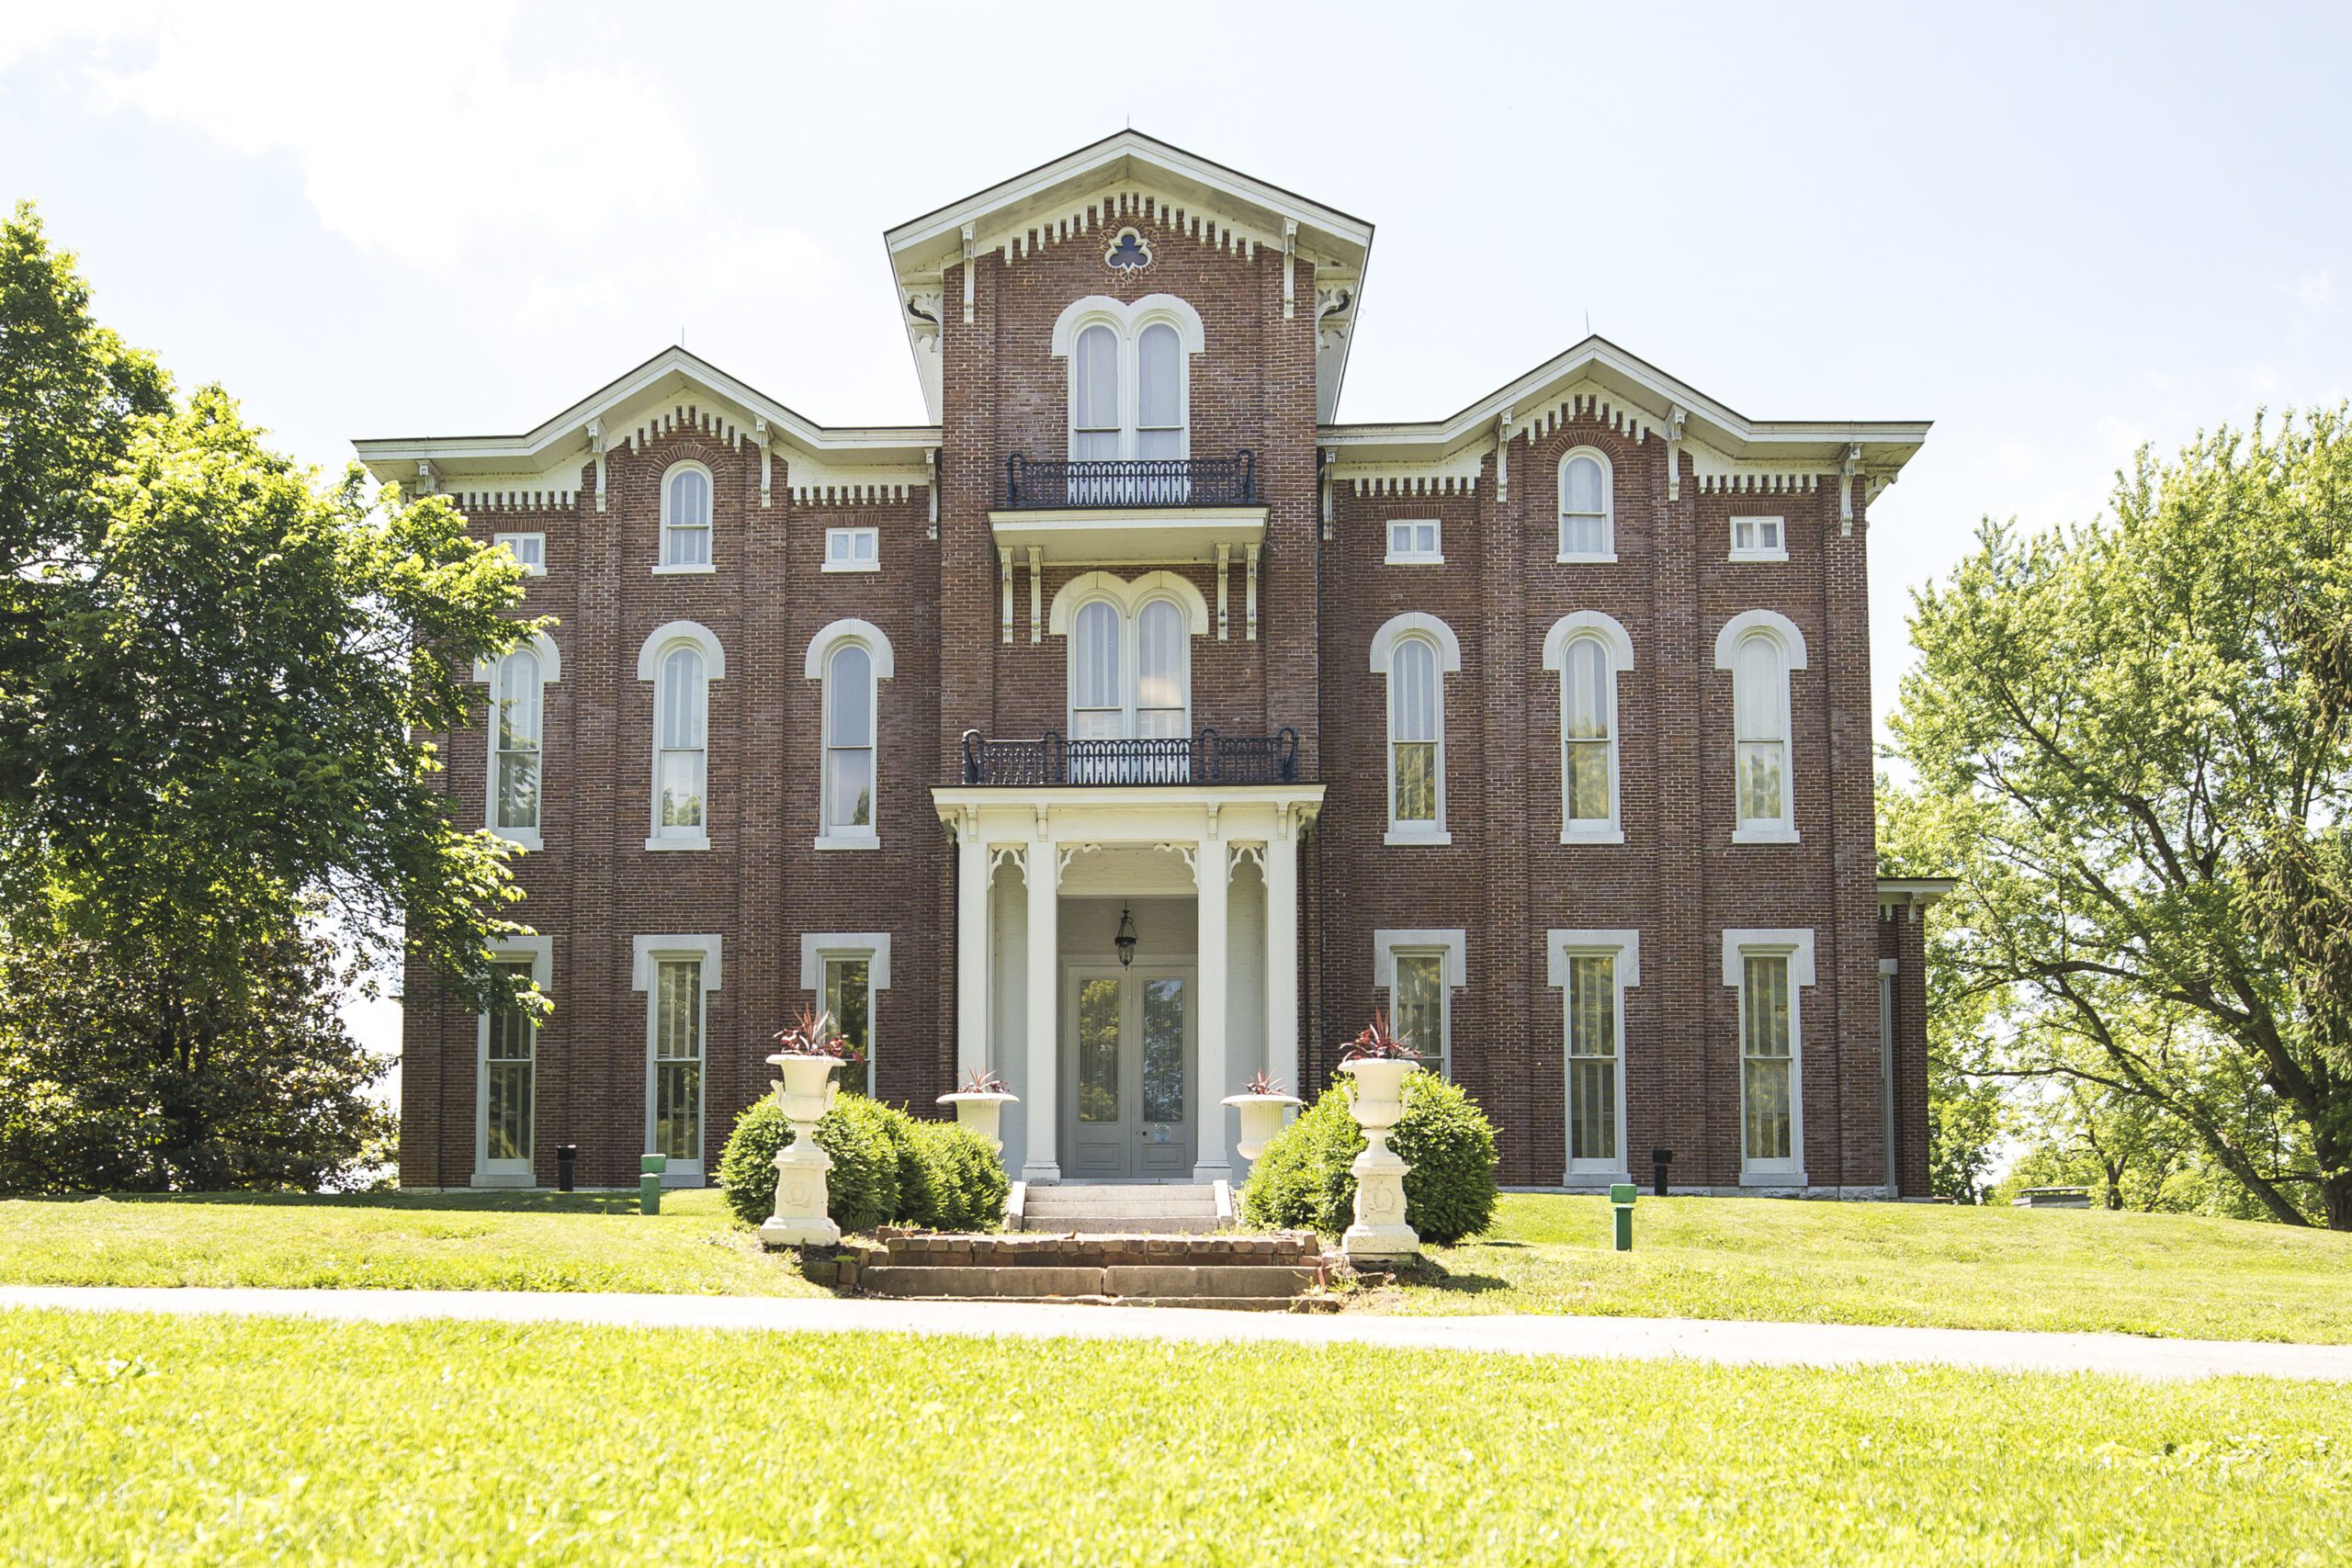 An exterior view of White Hall.